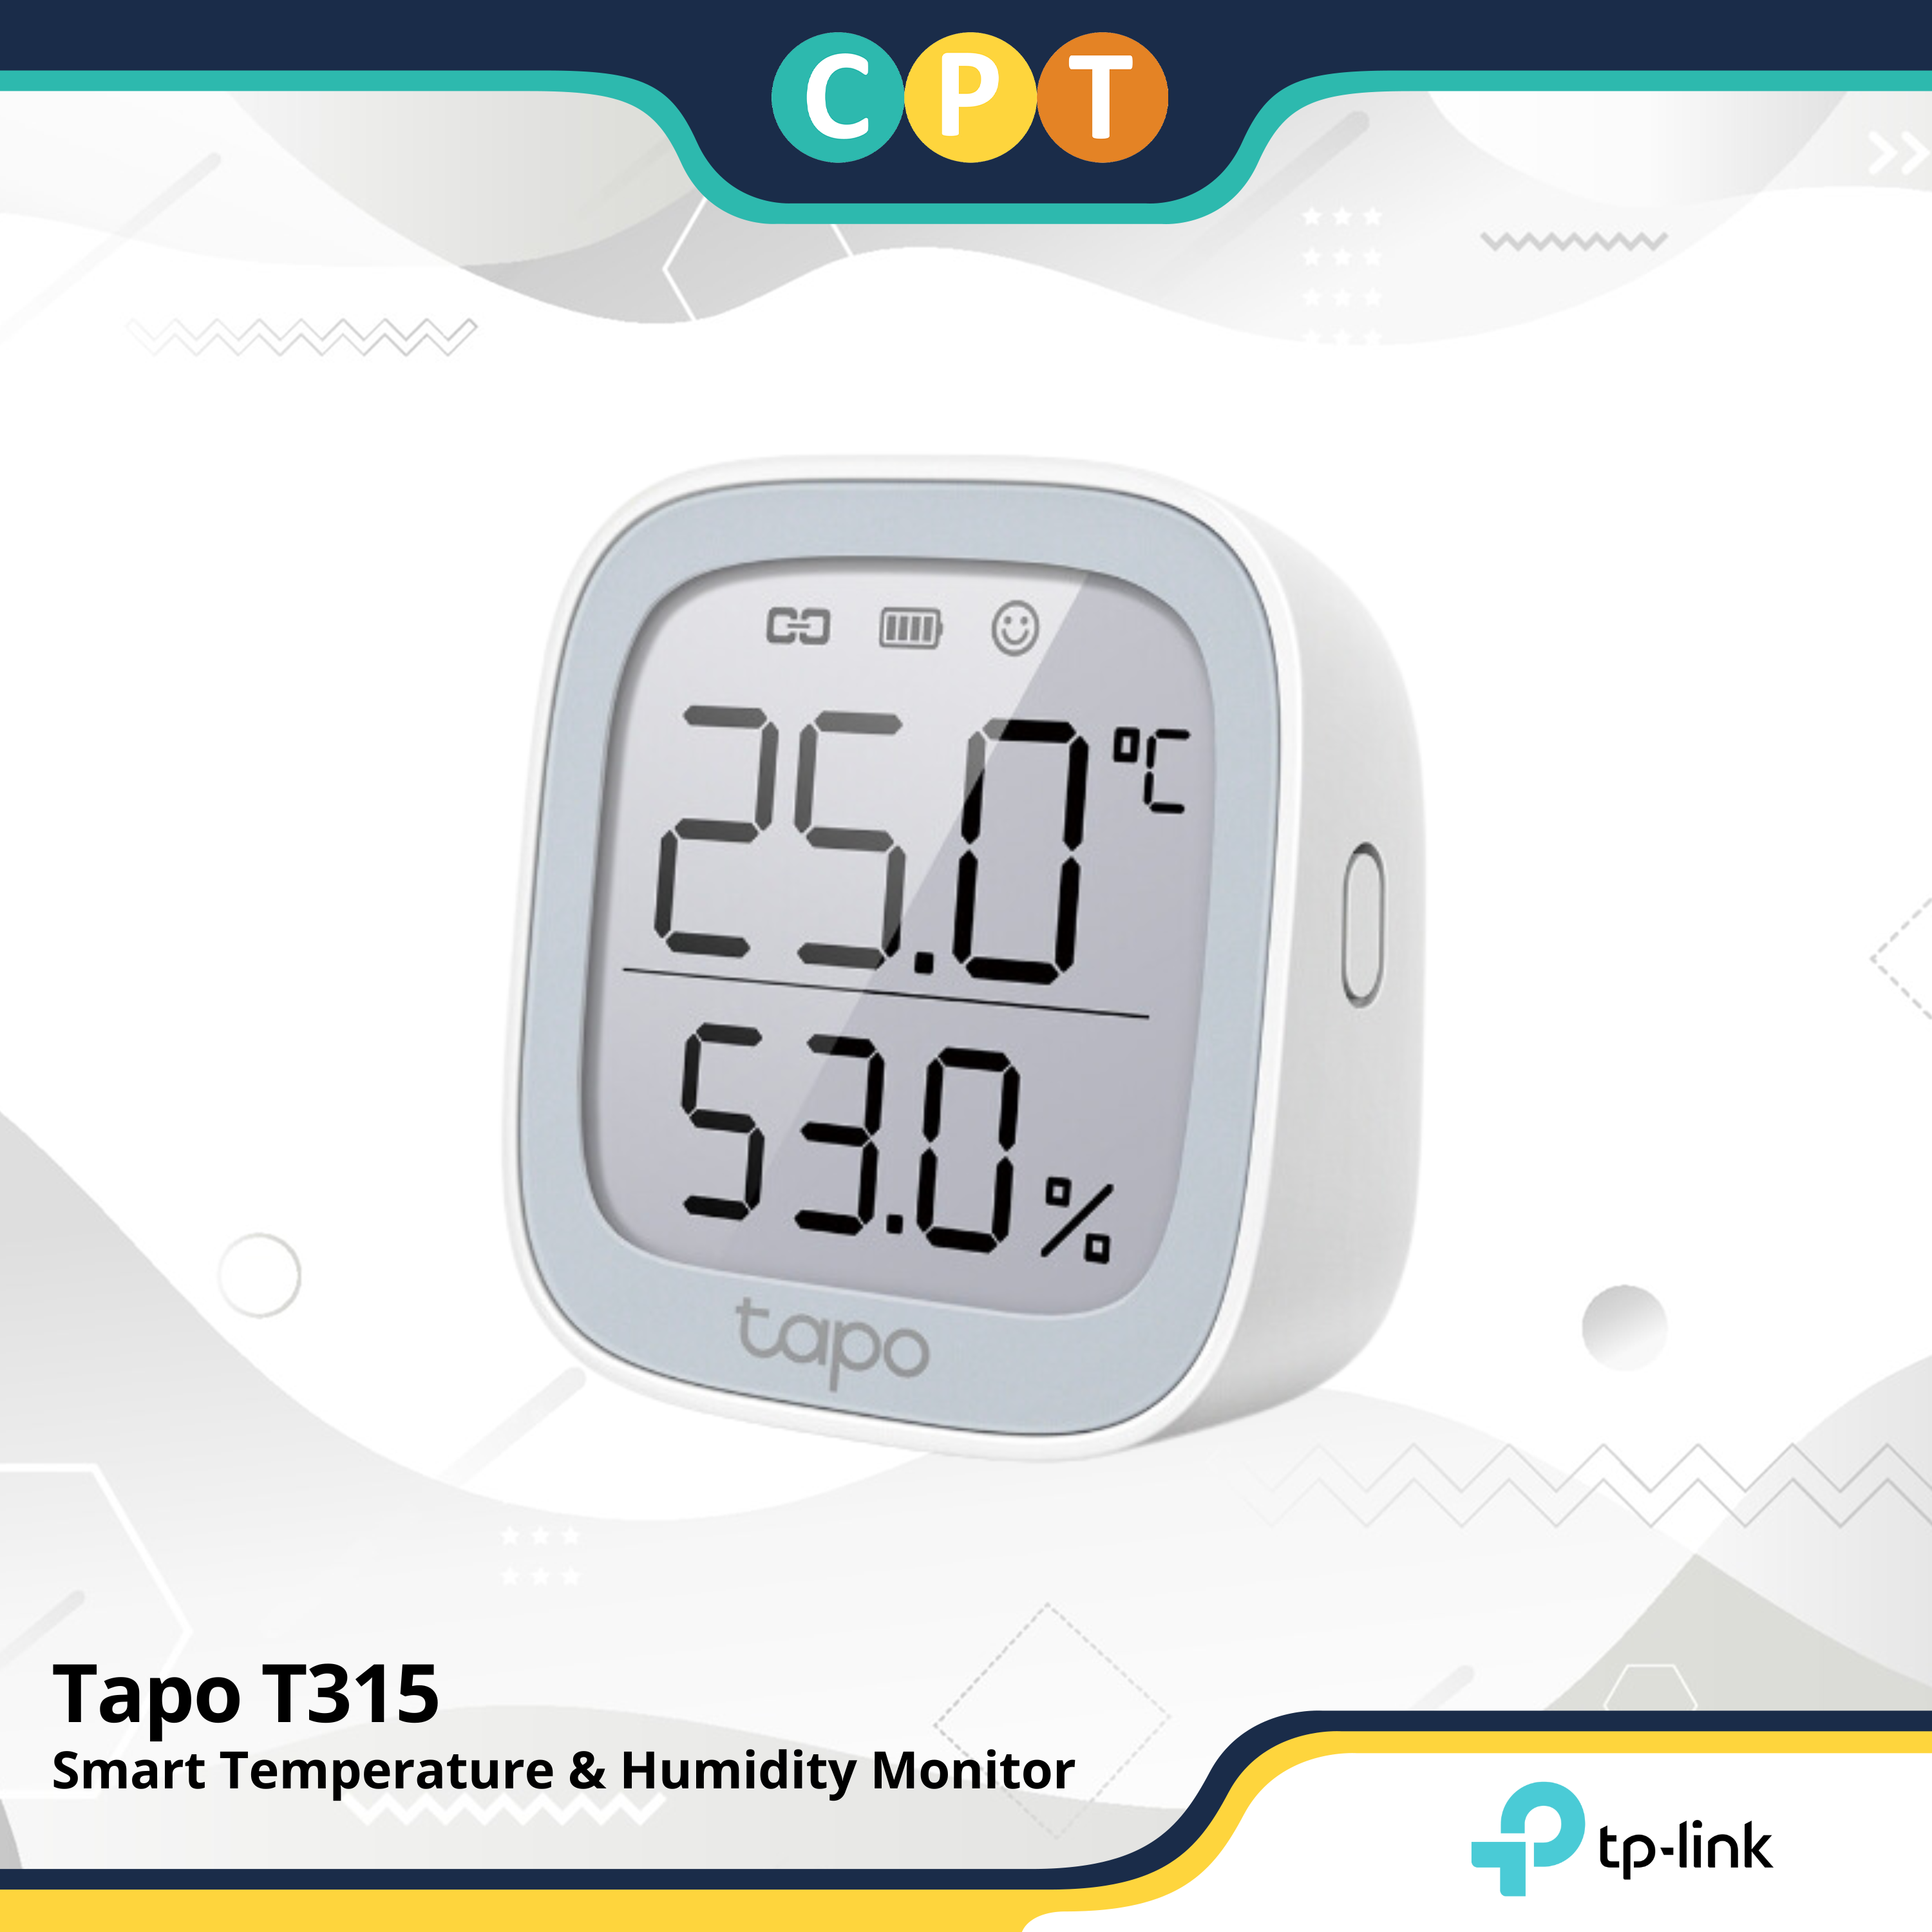 NEW ARRIVAL] TP-Link Tapo T315 Real-Time Accurate Monitoring Smart  Temperature Humidity Monitor, TPLink, TP Link